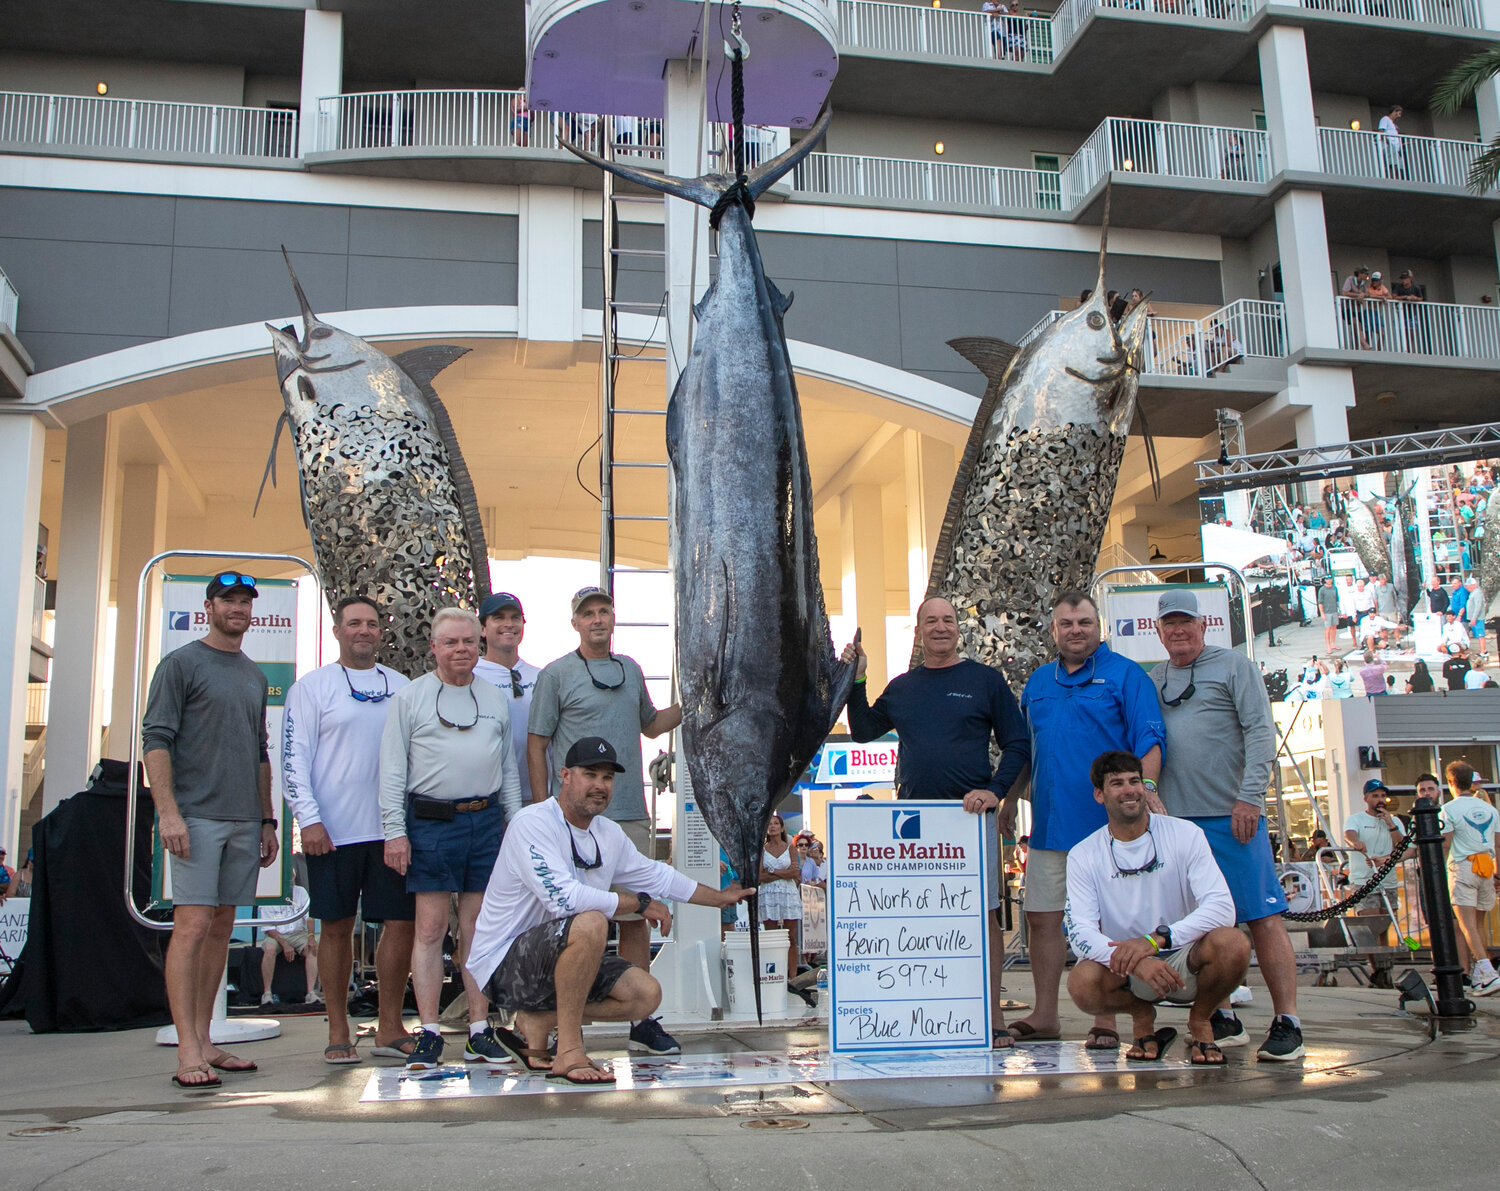 The sixth and final blue marlin weighed at the Blue Marlin Grand Championship in Orange Beach checked in at 597.4 pounds and 121 inches caught by Kevin Courville from A Work of Art. It stood as the largest blue marlin caught at the final billfish tournament of the Gulf Coast Triple Crown.